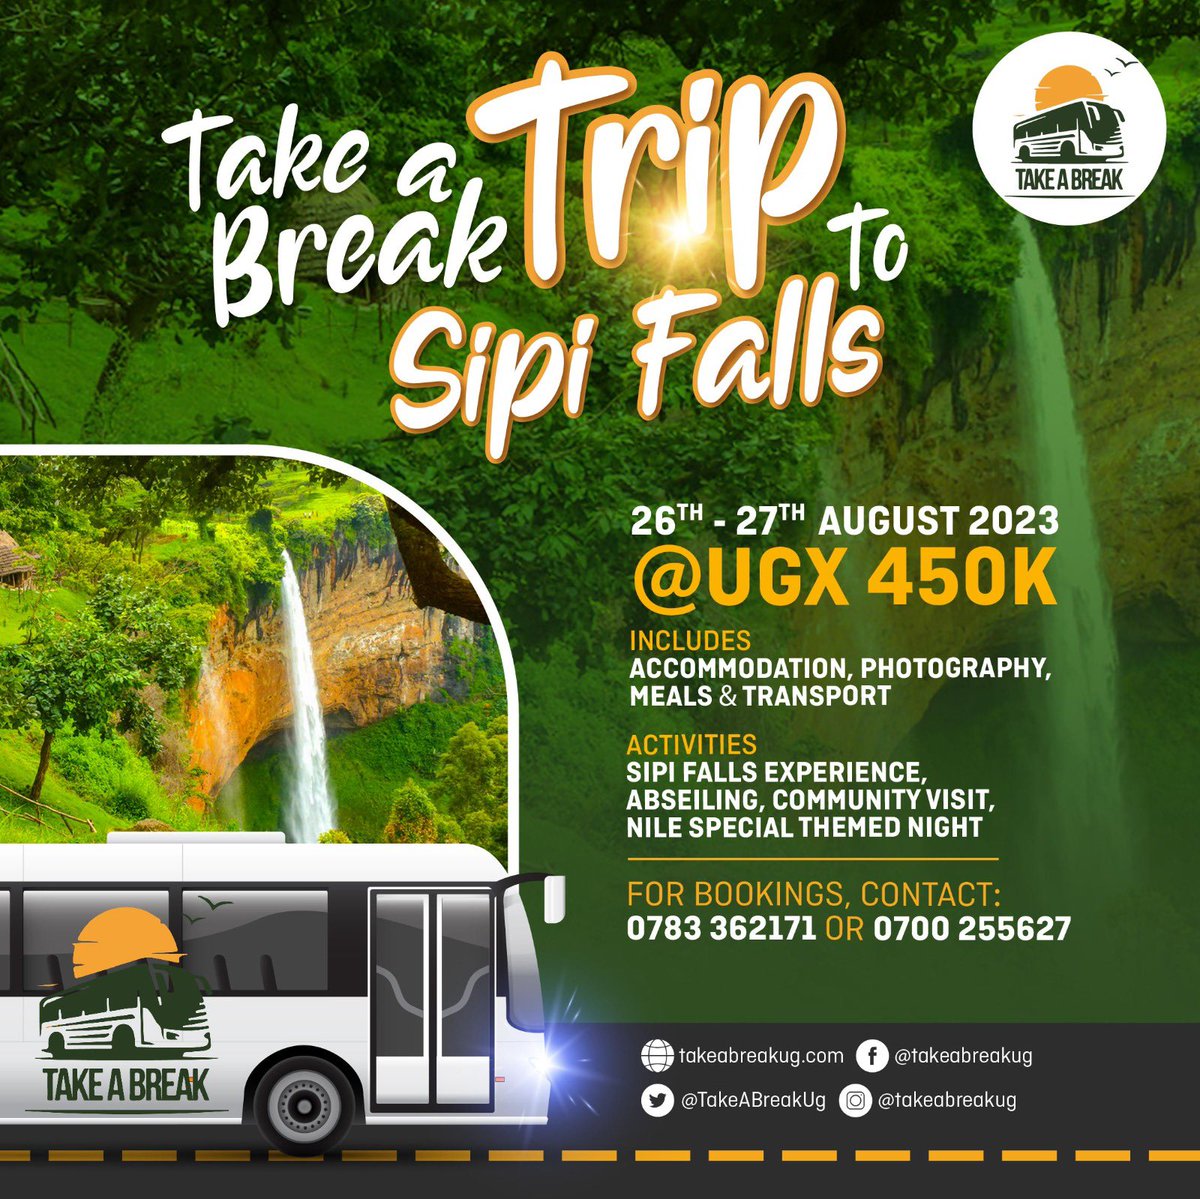 'Embrace the Adventure! Life is short and the world is wide. Join us on this #TakeABreak excursion to Sipi Falls on Aug 26-27. Immerse yourself in Uganda's breathtaking beauty, chase waterfalls, and create memories that will last a lifetime, at 450k. DM us to book. #MadeOfUganda